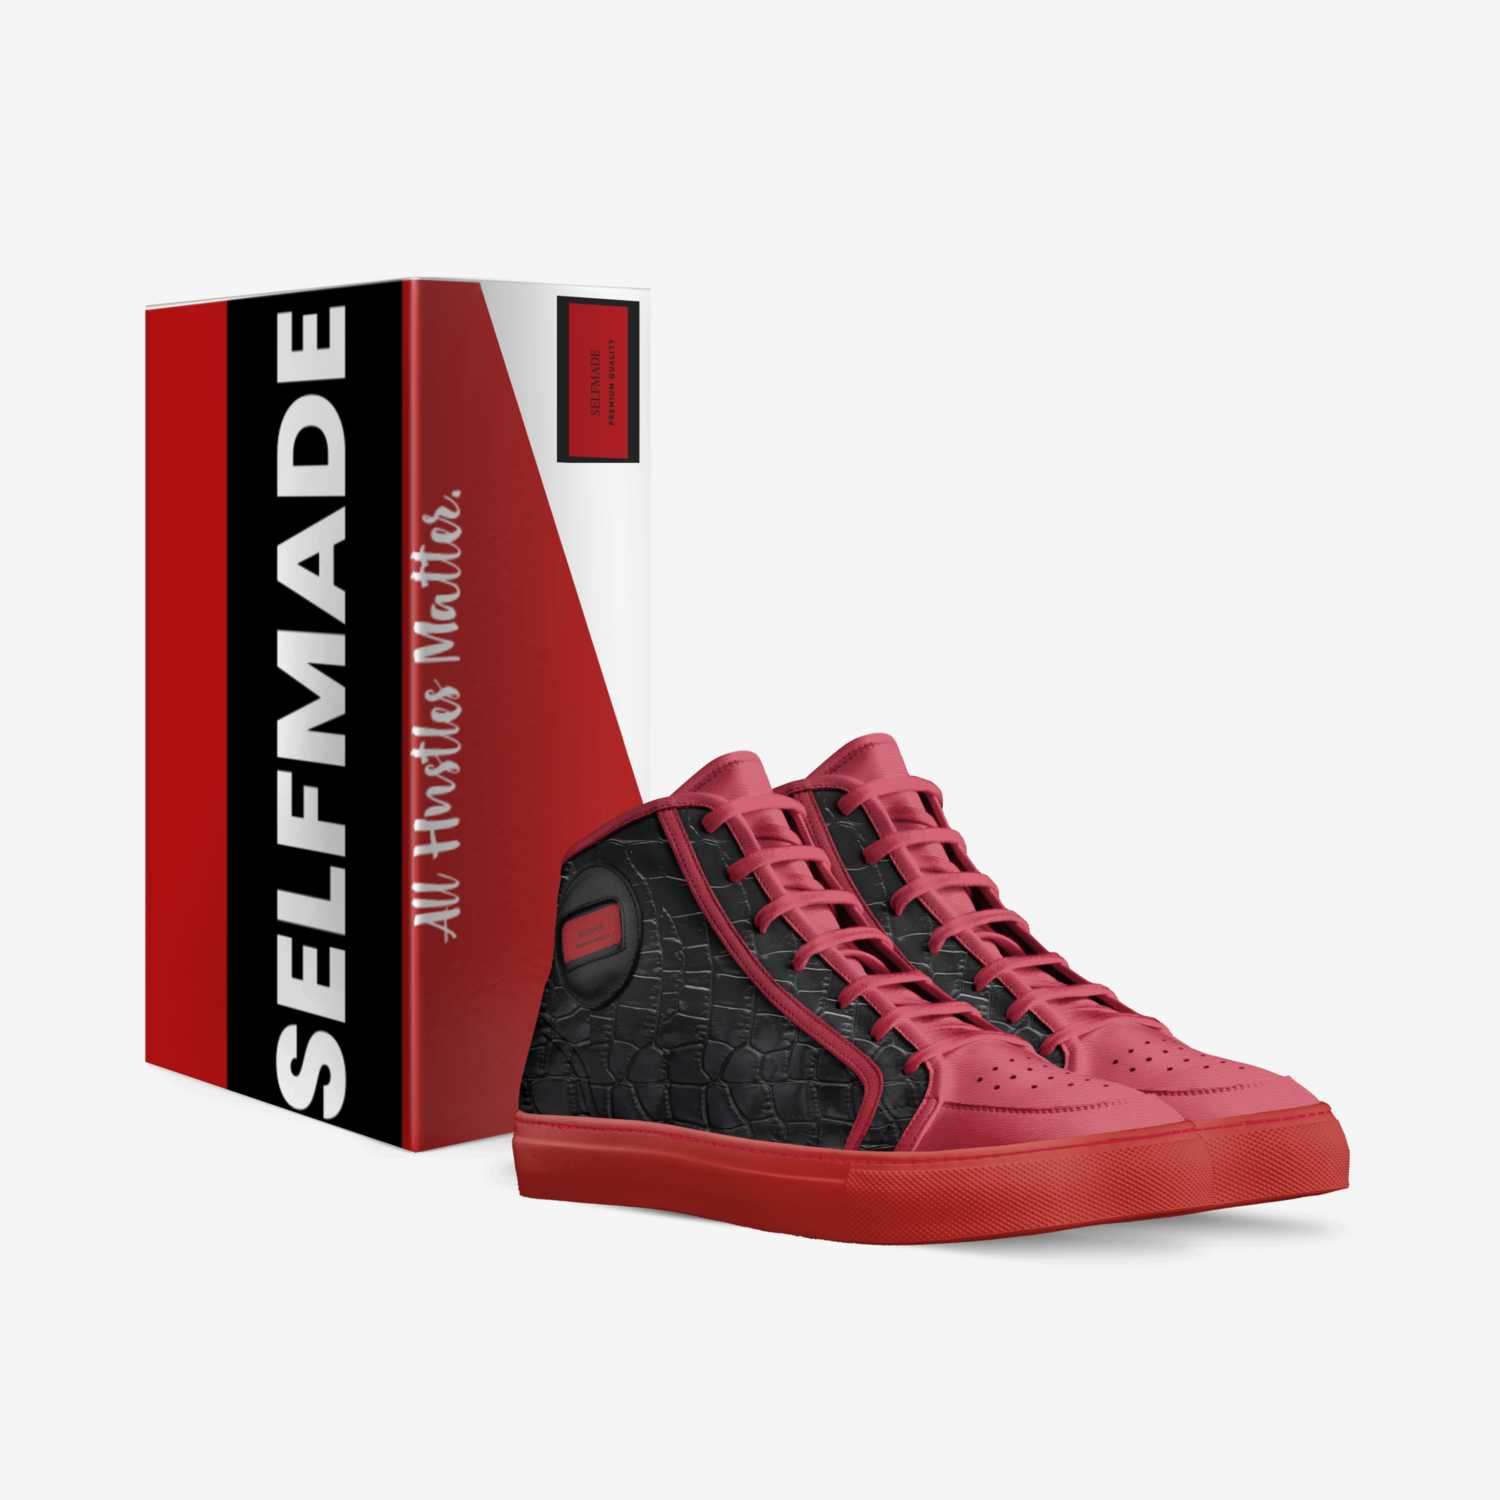 SELFMADE 98 custom made in Italy shoes by Curtis Matthews | Box view